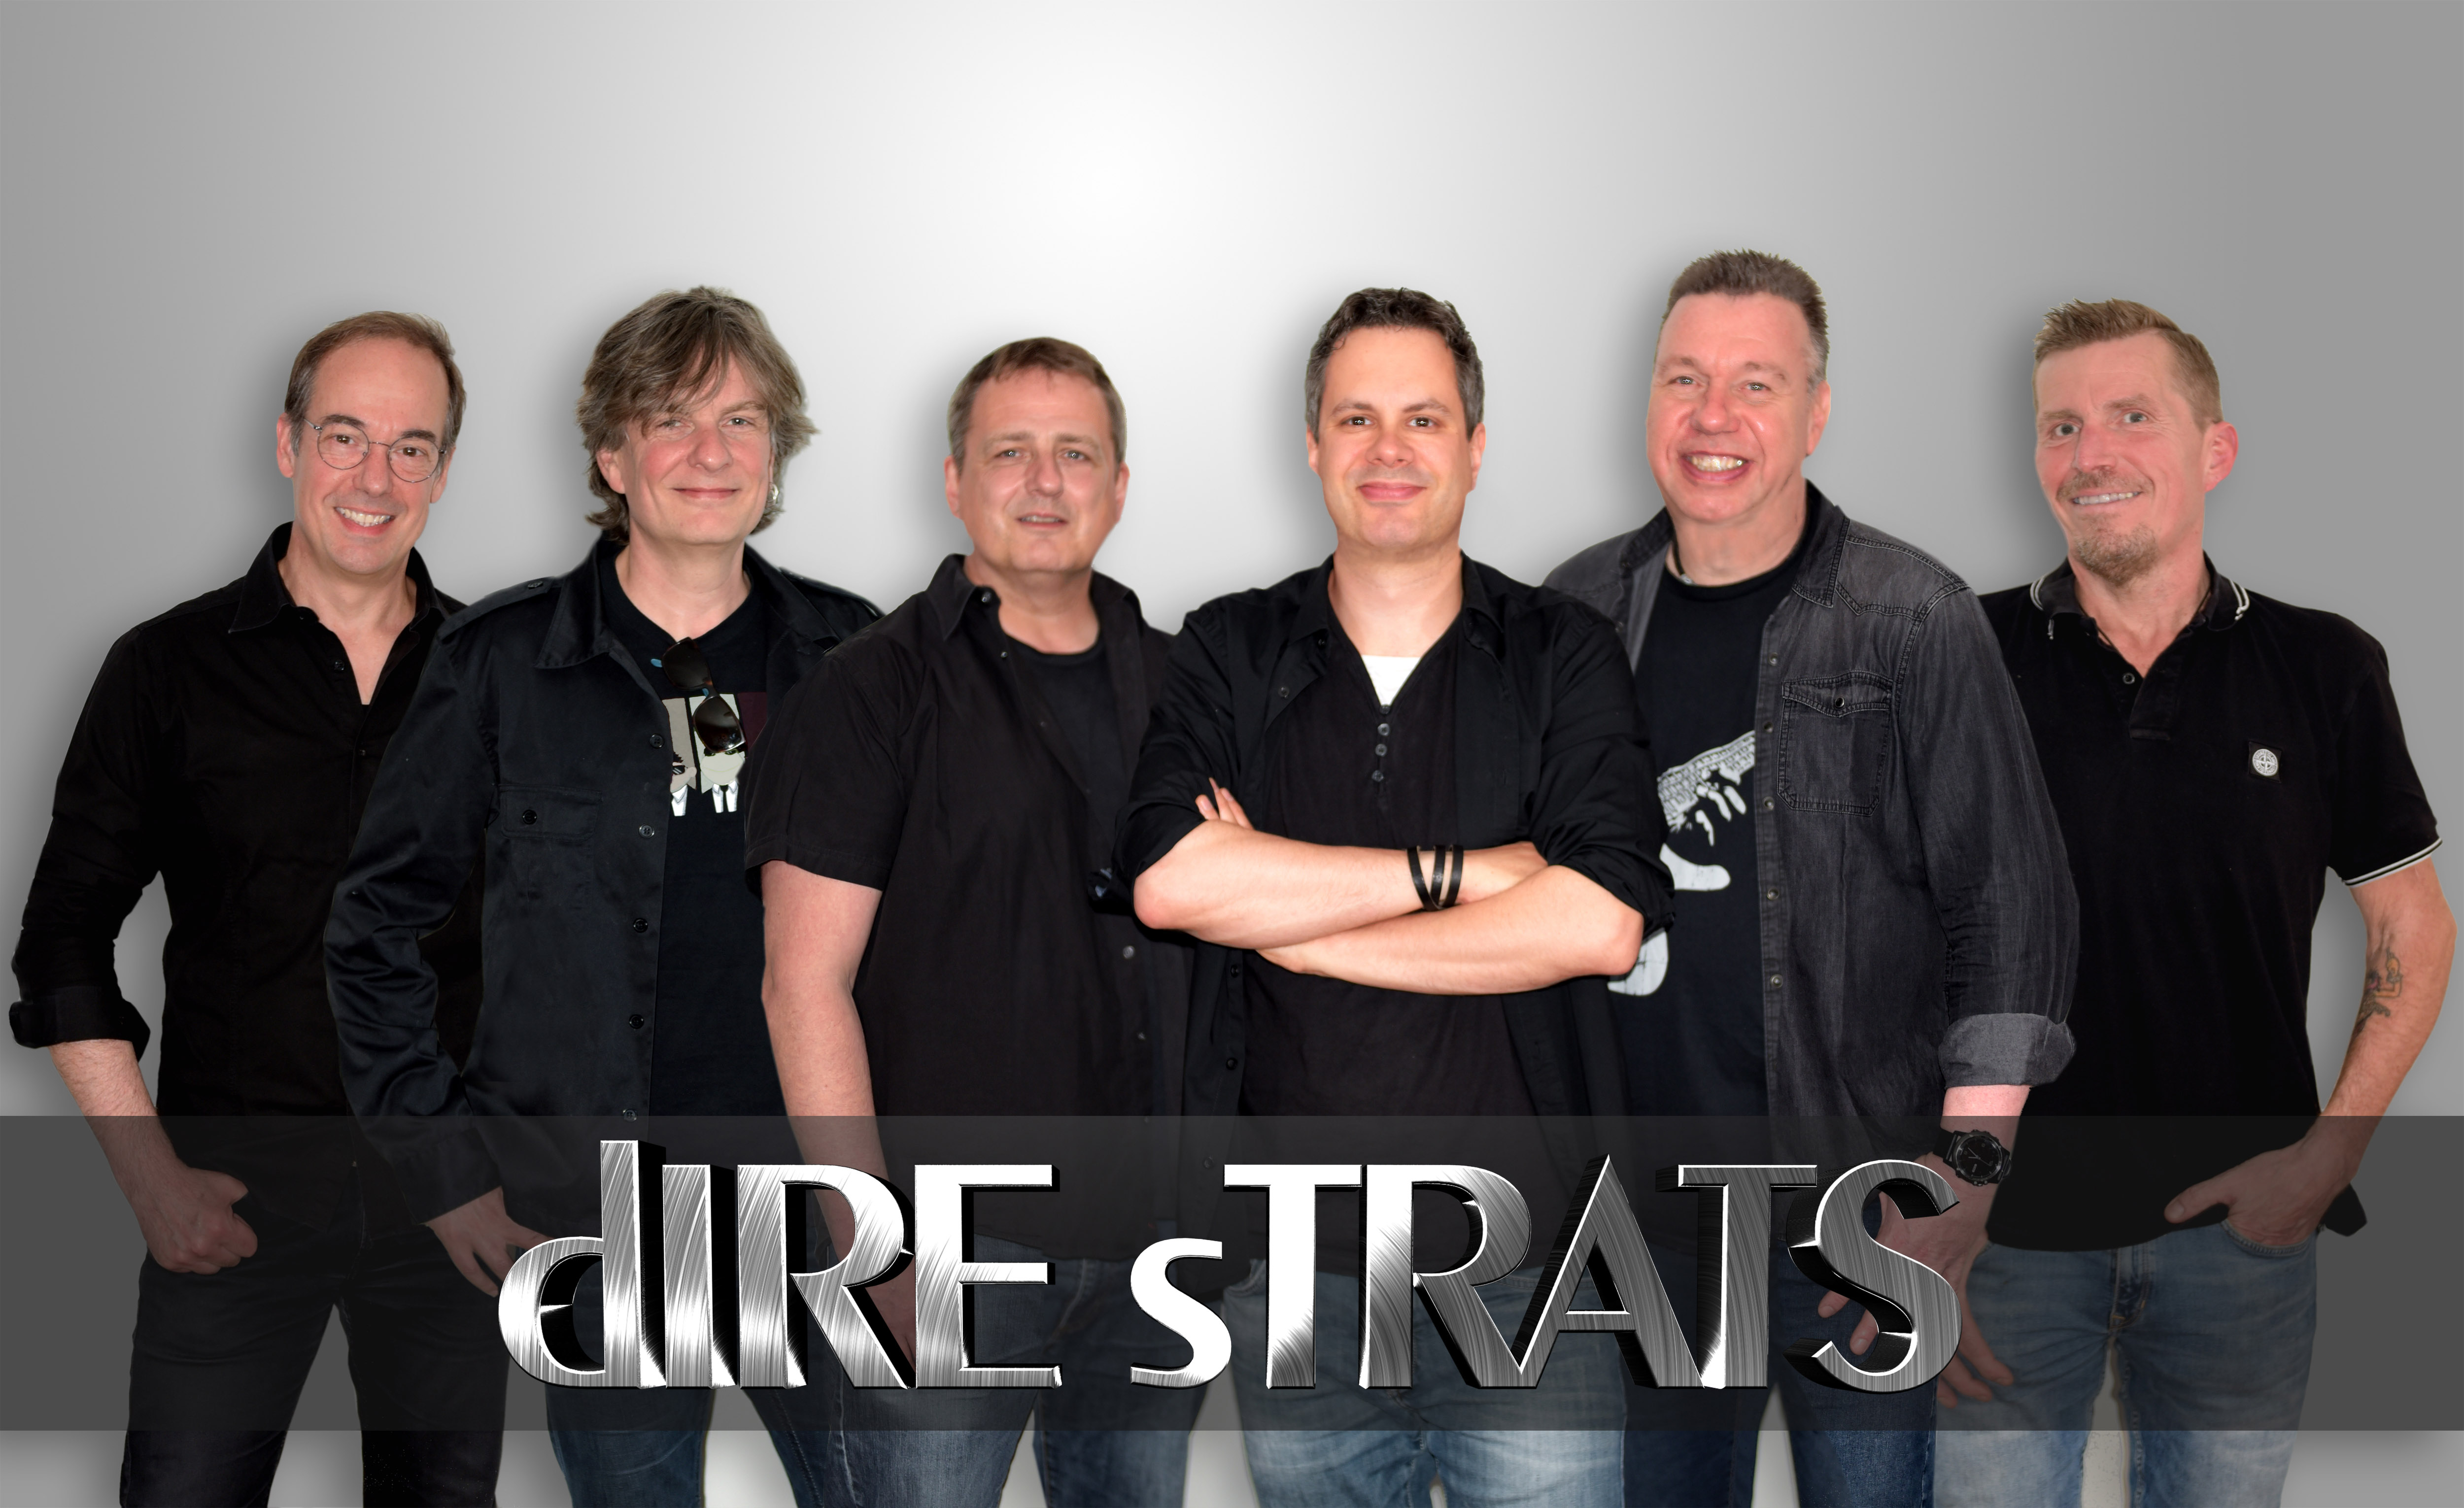 dIRE sTRATS © dIRE sTRATS GbR